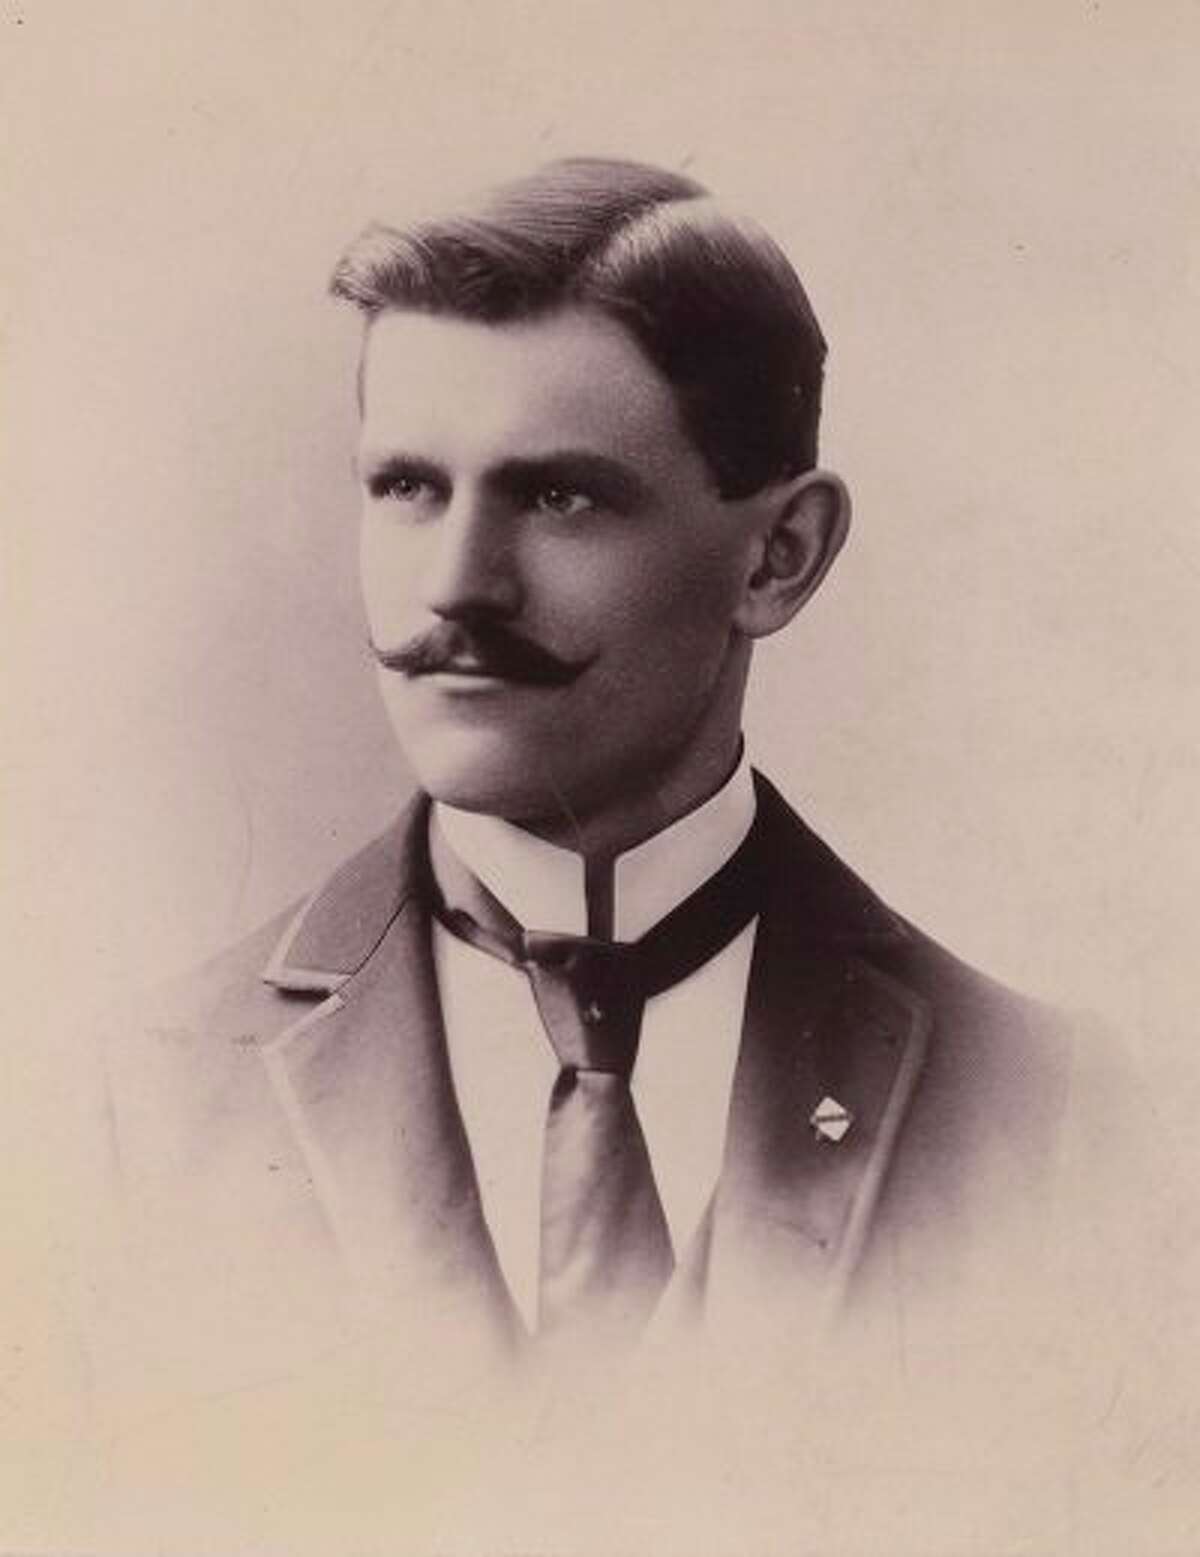 Thomas G. Griswold, ca. 1897 (Courtesy Herbert H. and Grace A. Dow Foundation)